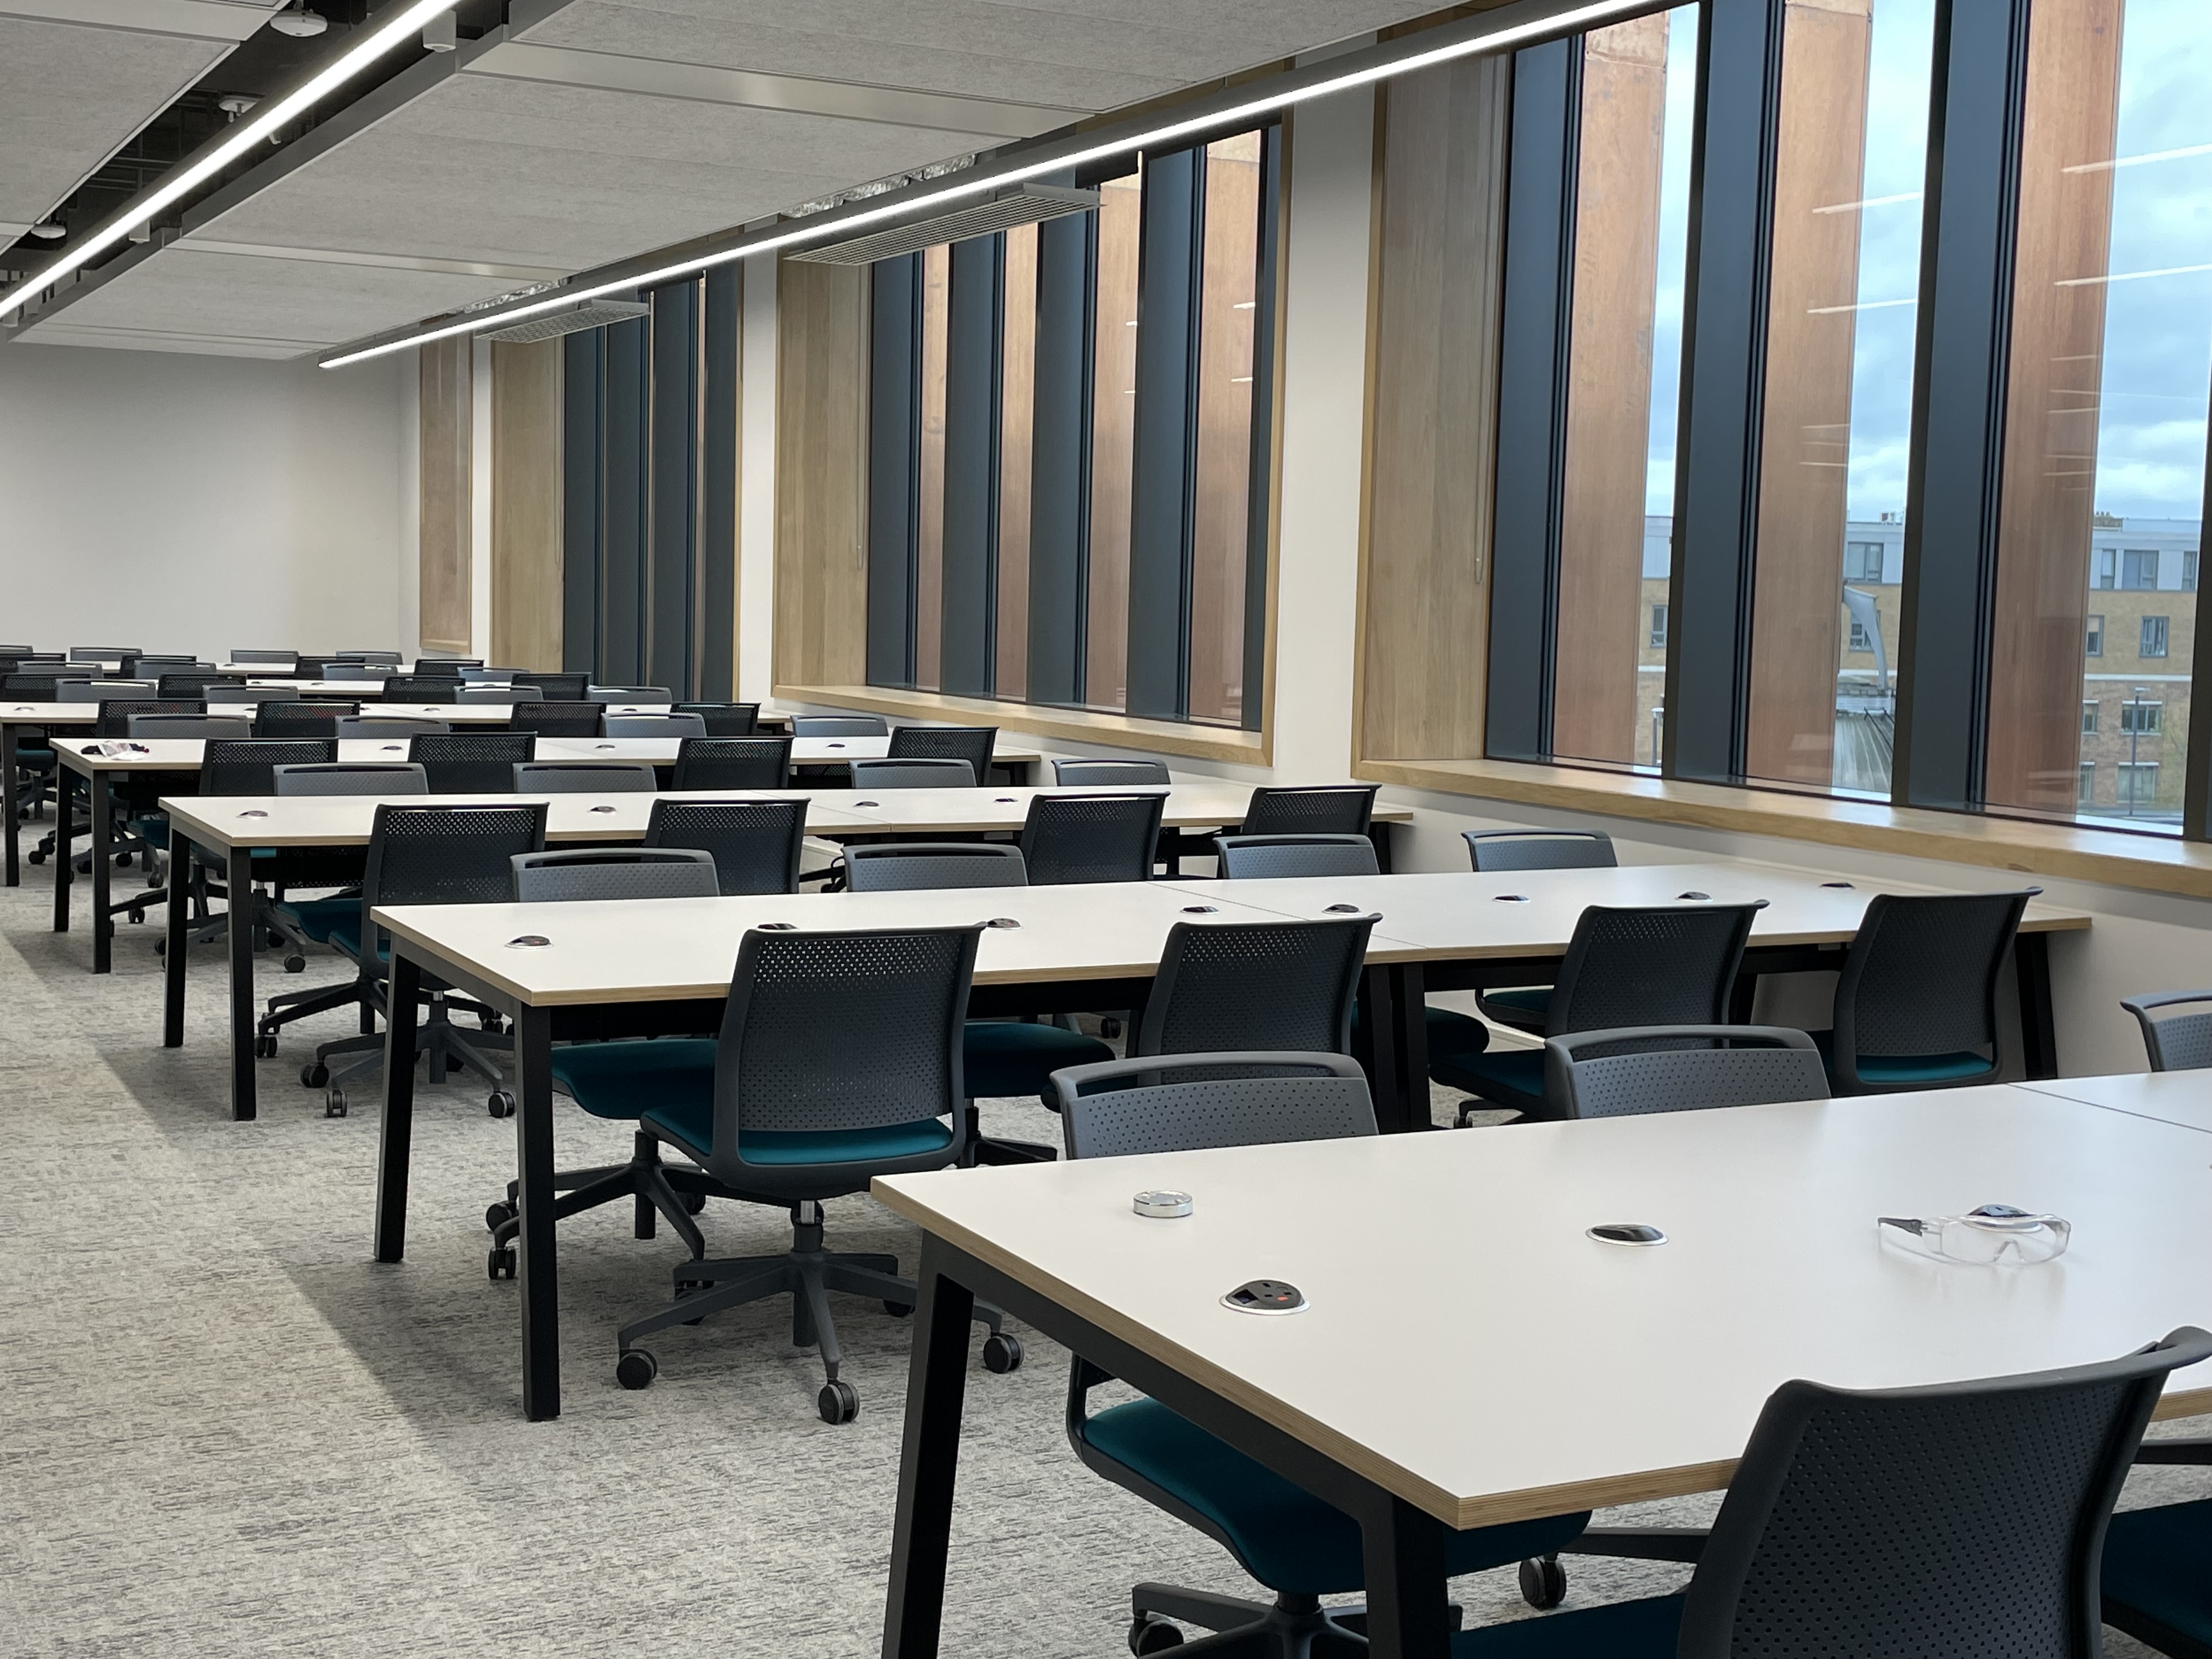 Study desks and chairs lined up along a wall